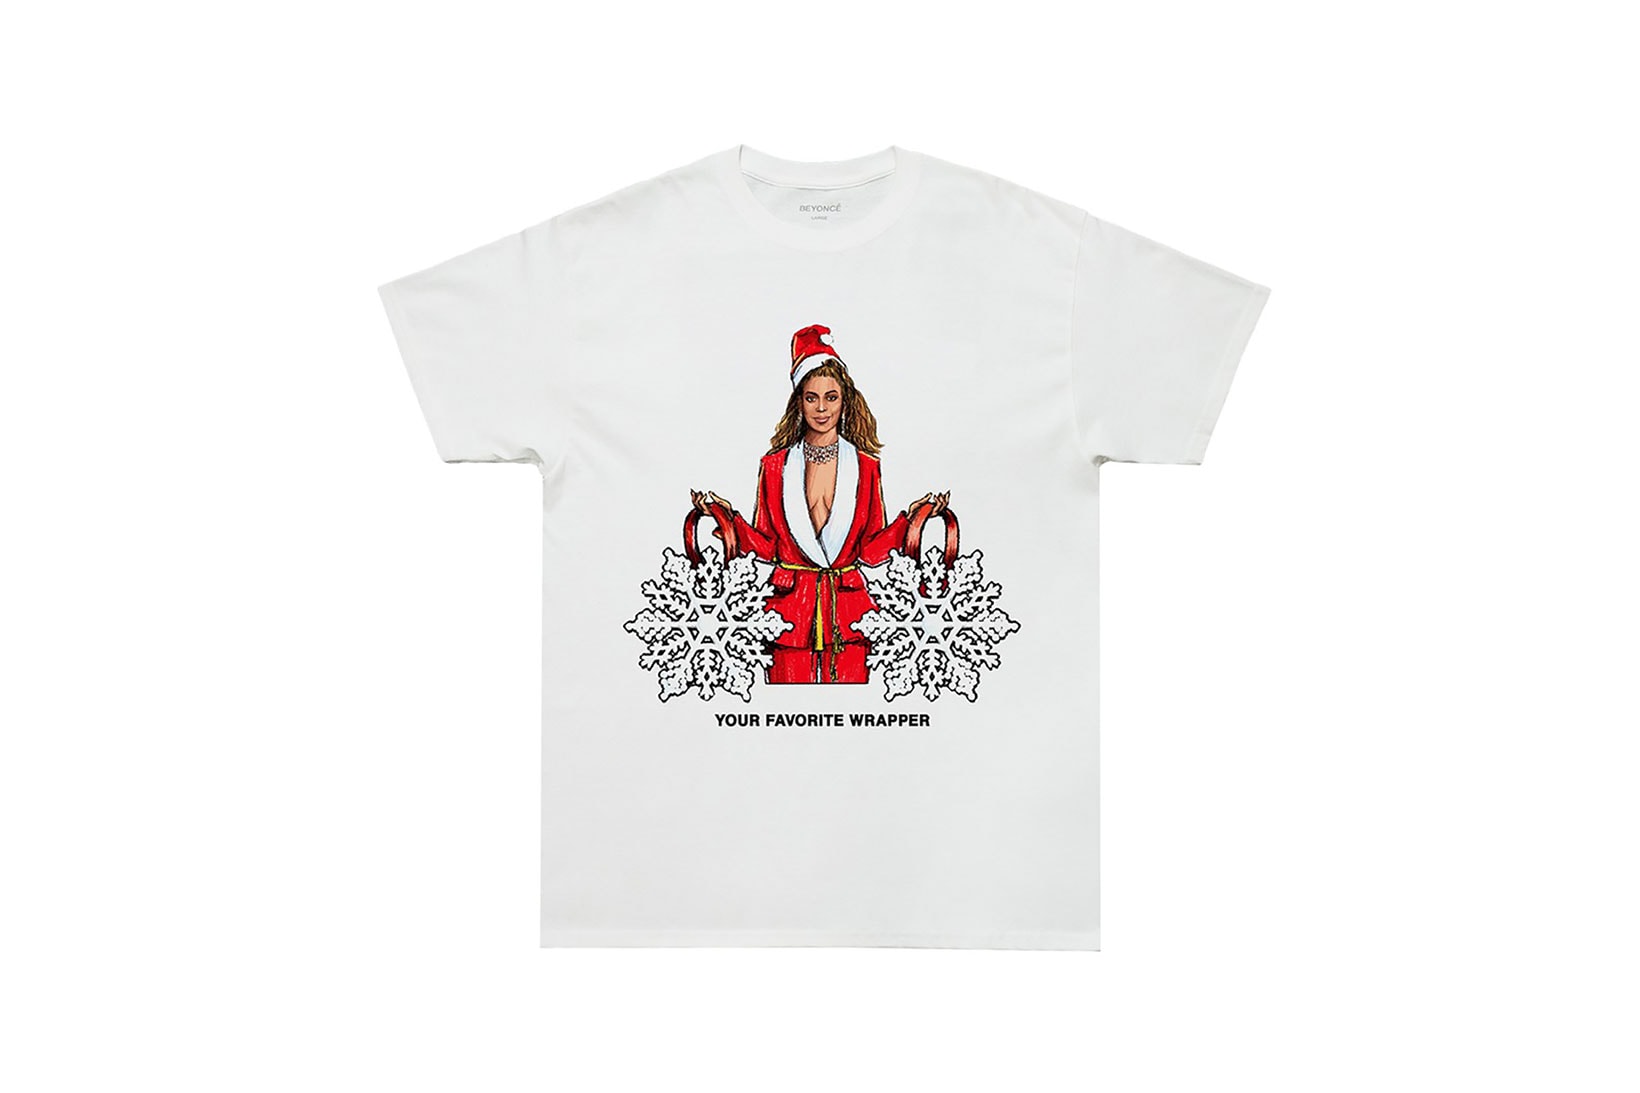 beyonce holiday christmas merch collection singer artist performer concert